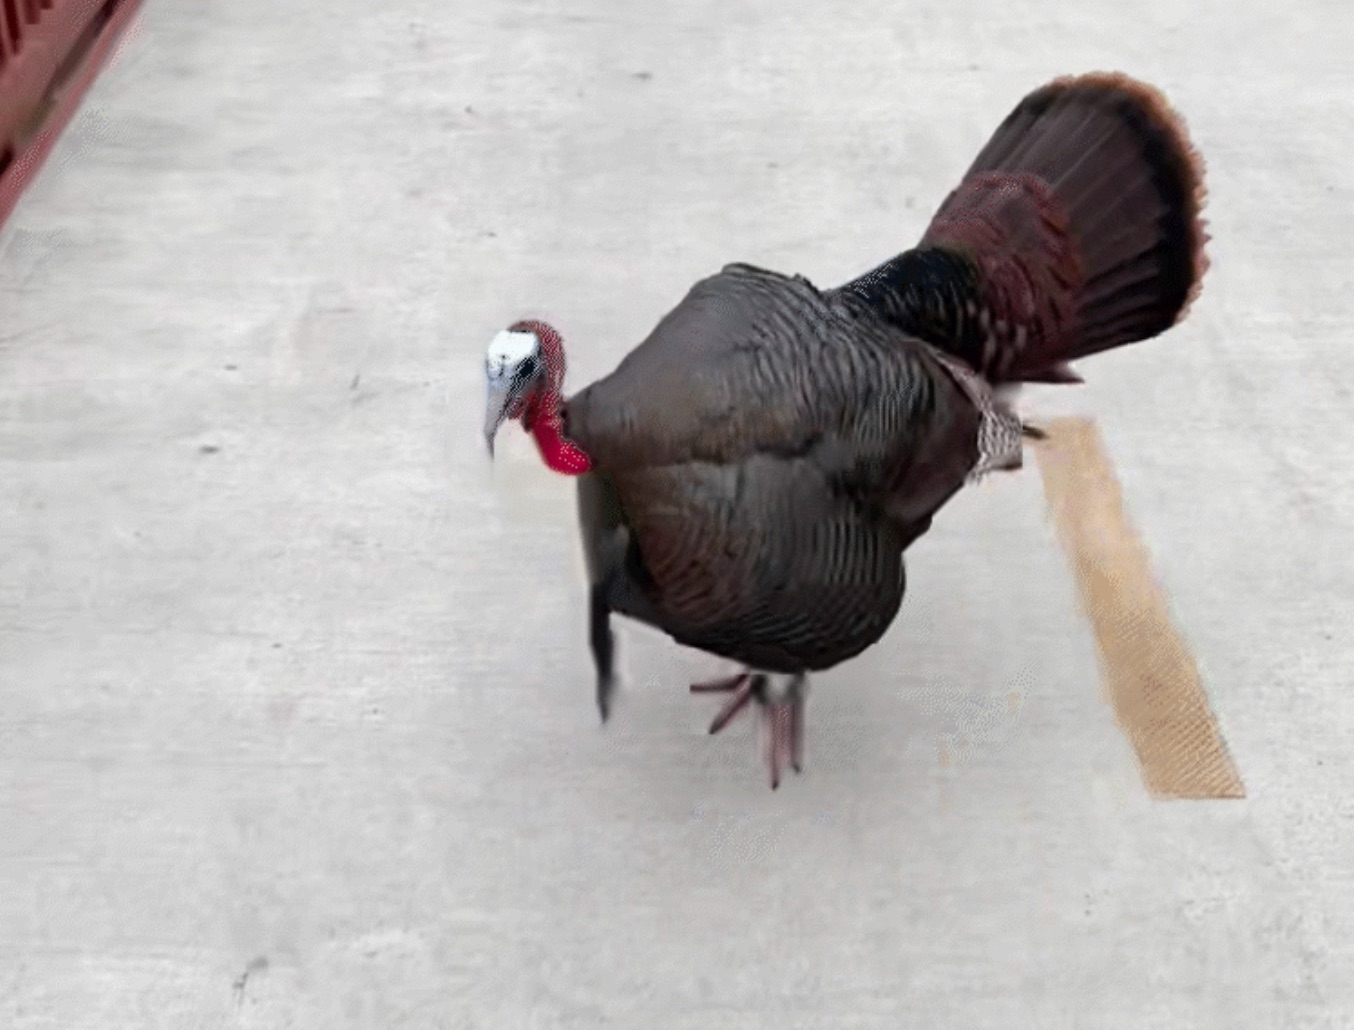 A wild turkey in D.C. is attacking people along a river trail.